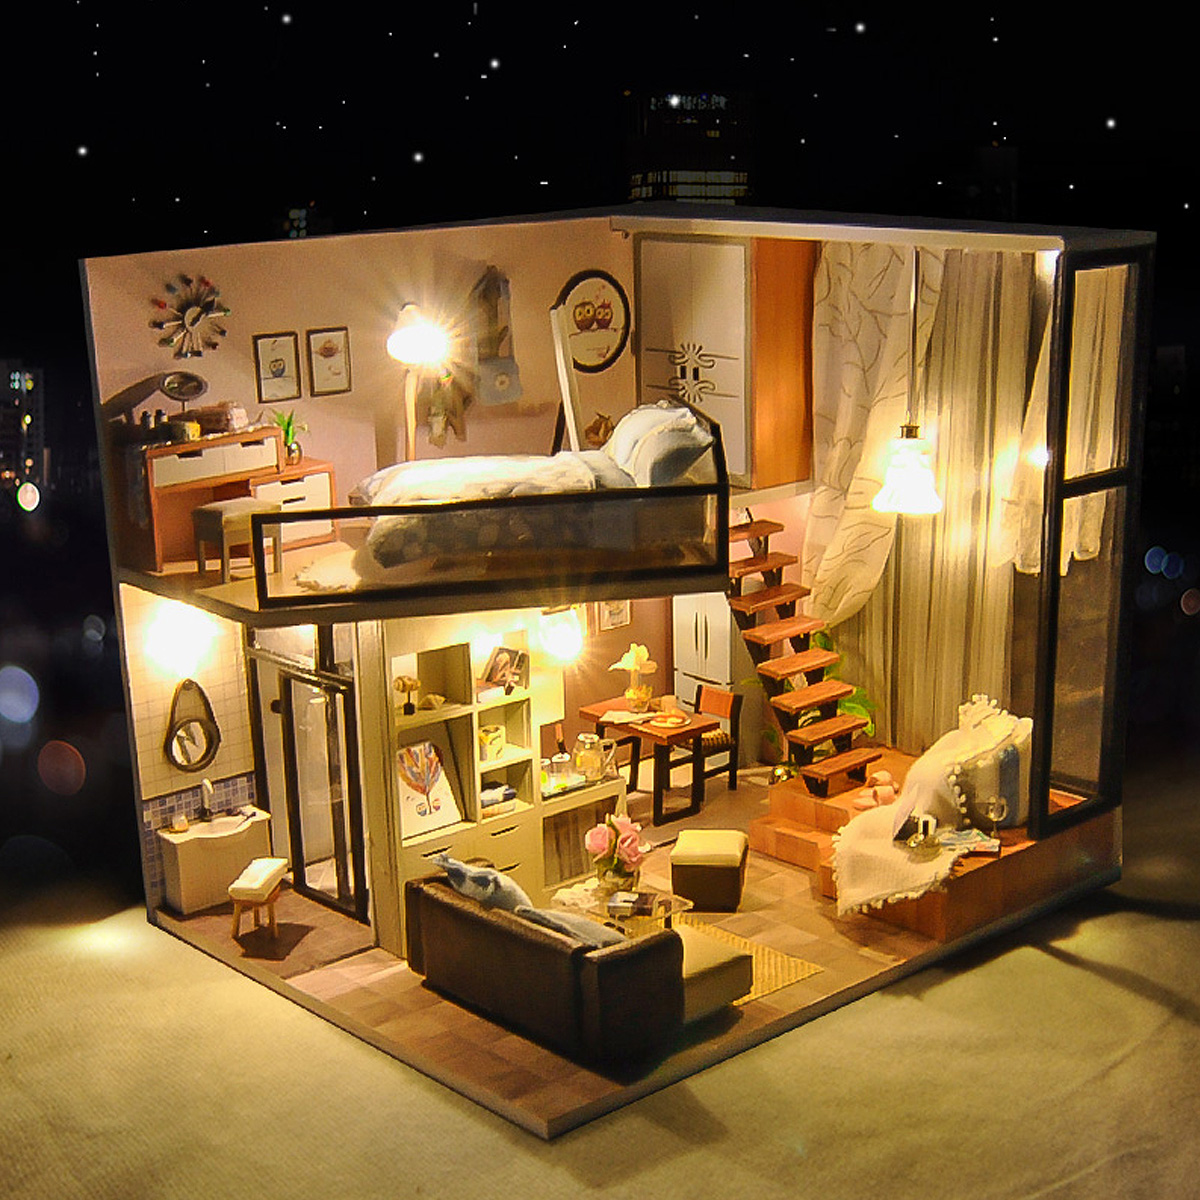 Christmas Gift for Kids, Children, Collectors, Mini Cockloft DIY Miniatures Furniture Doll House (With LED Light)